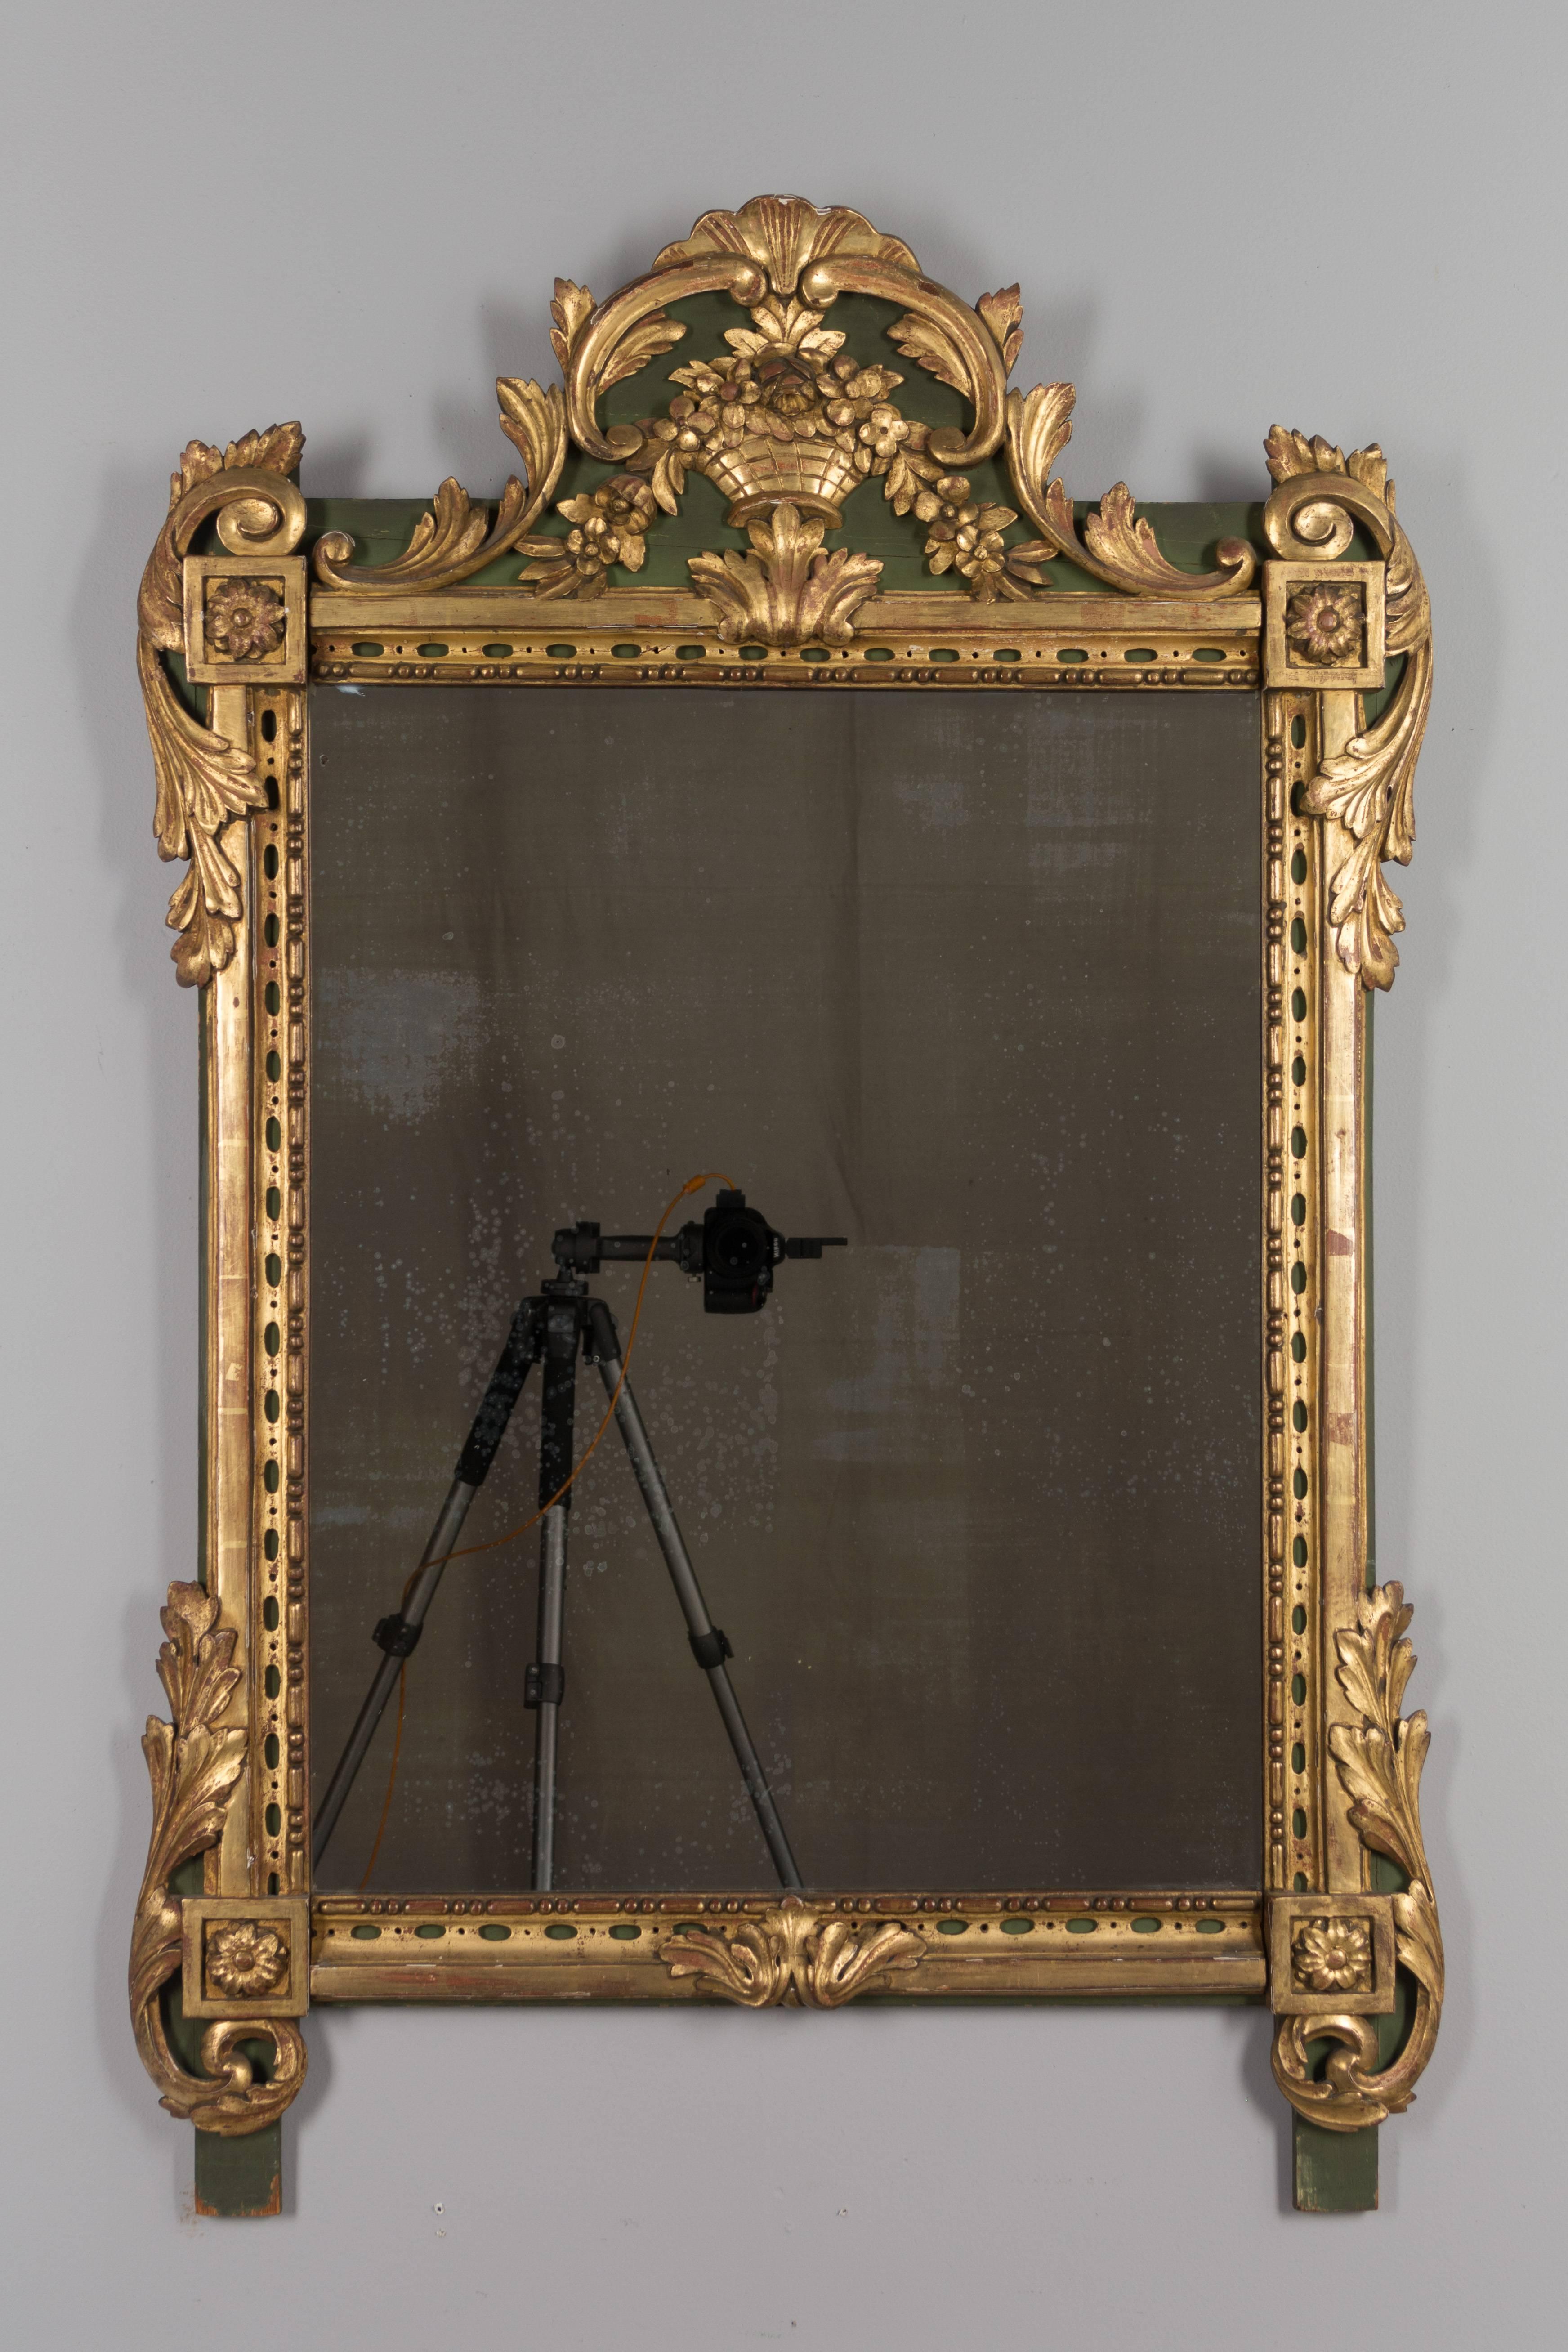 Régence 19th Century French Régence Style Parcel-Gilt Mirror